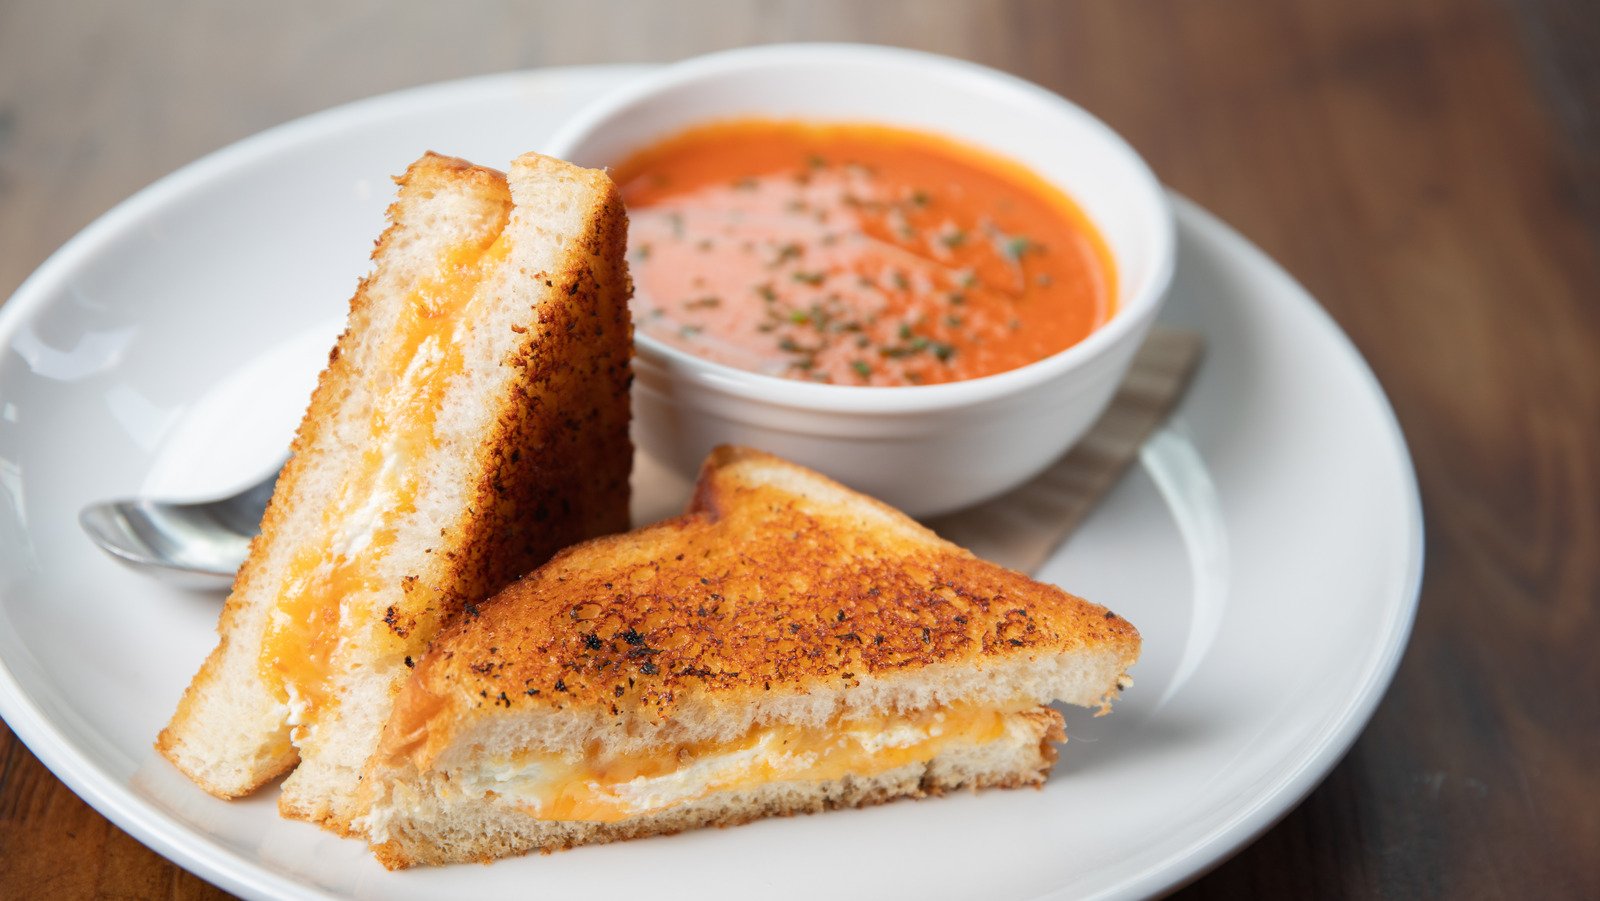 Here's Why Your Grilled Cheese Is Soggy